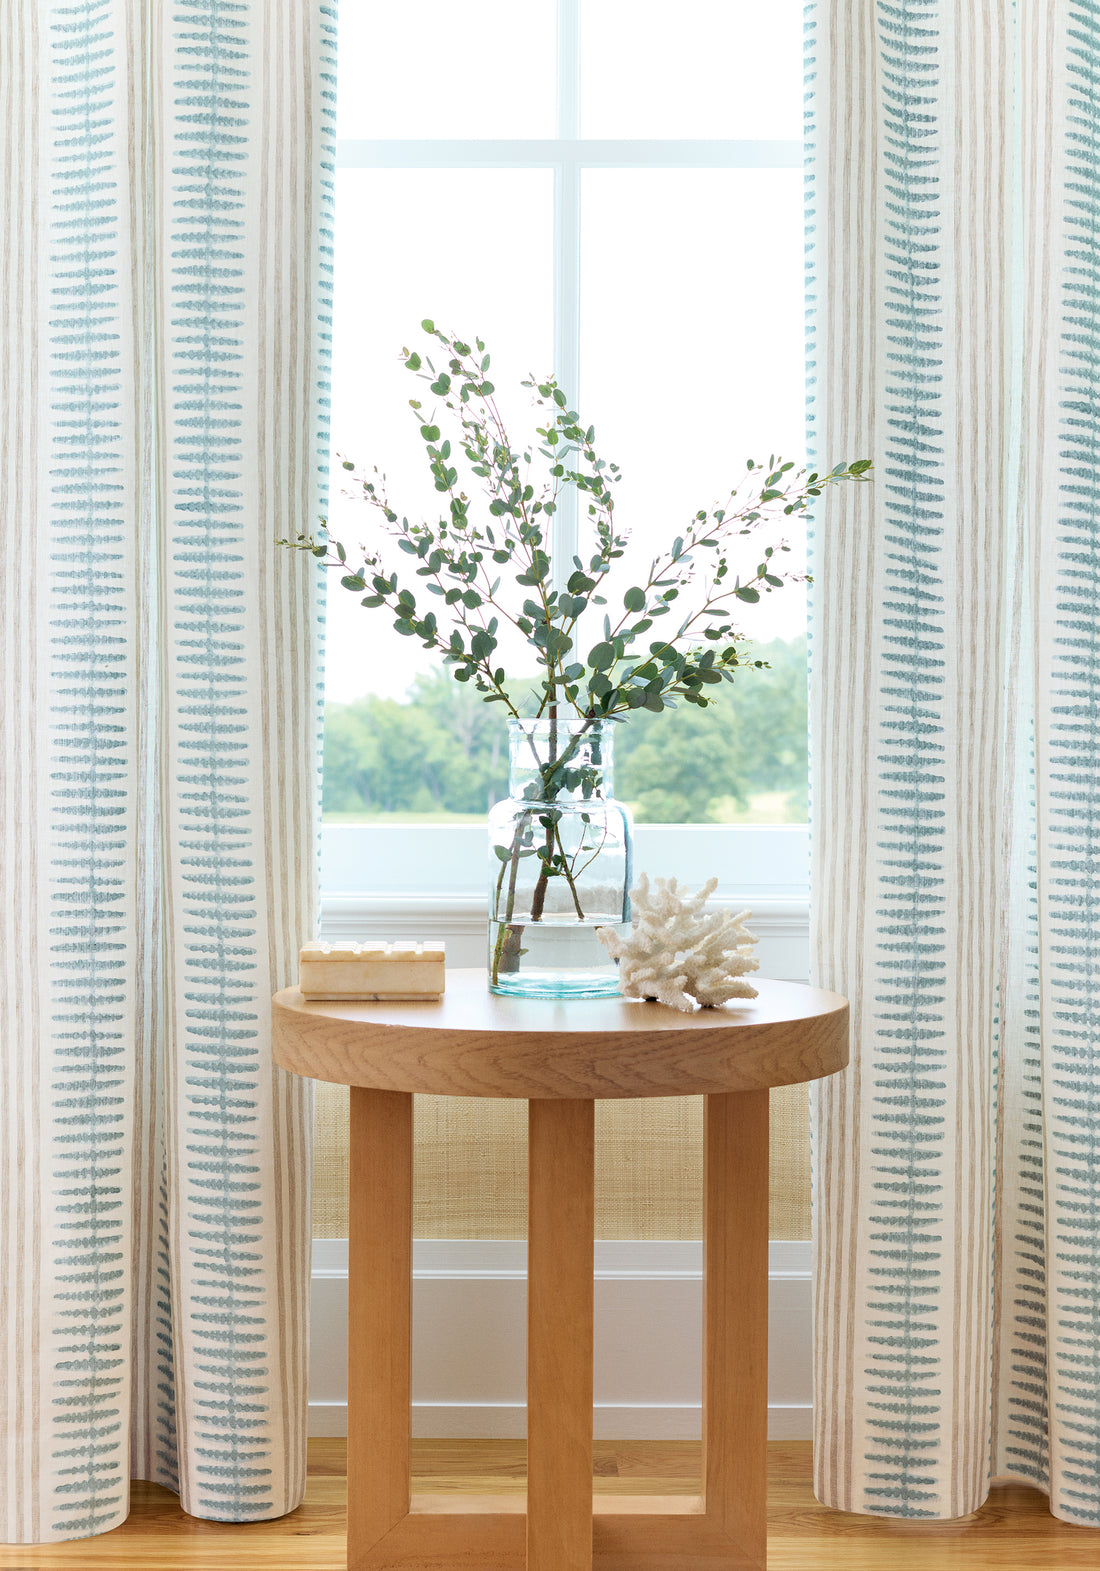 Curtain in Indo Stripe fabric in seaglass color - pattern number F981315 - by Thibaut in the Montecito collection